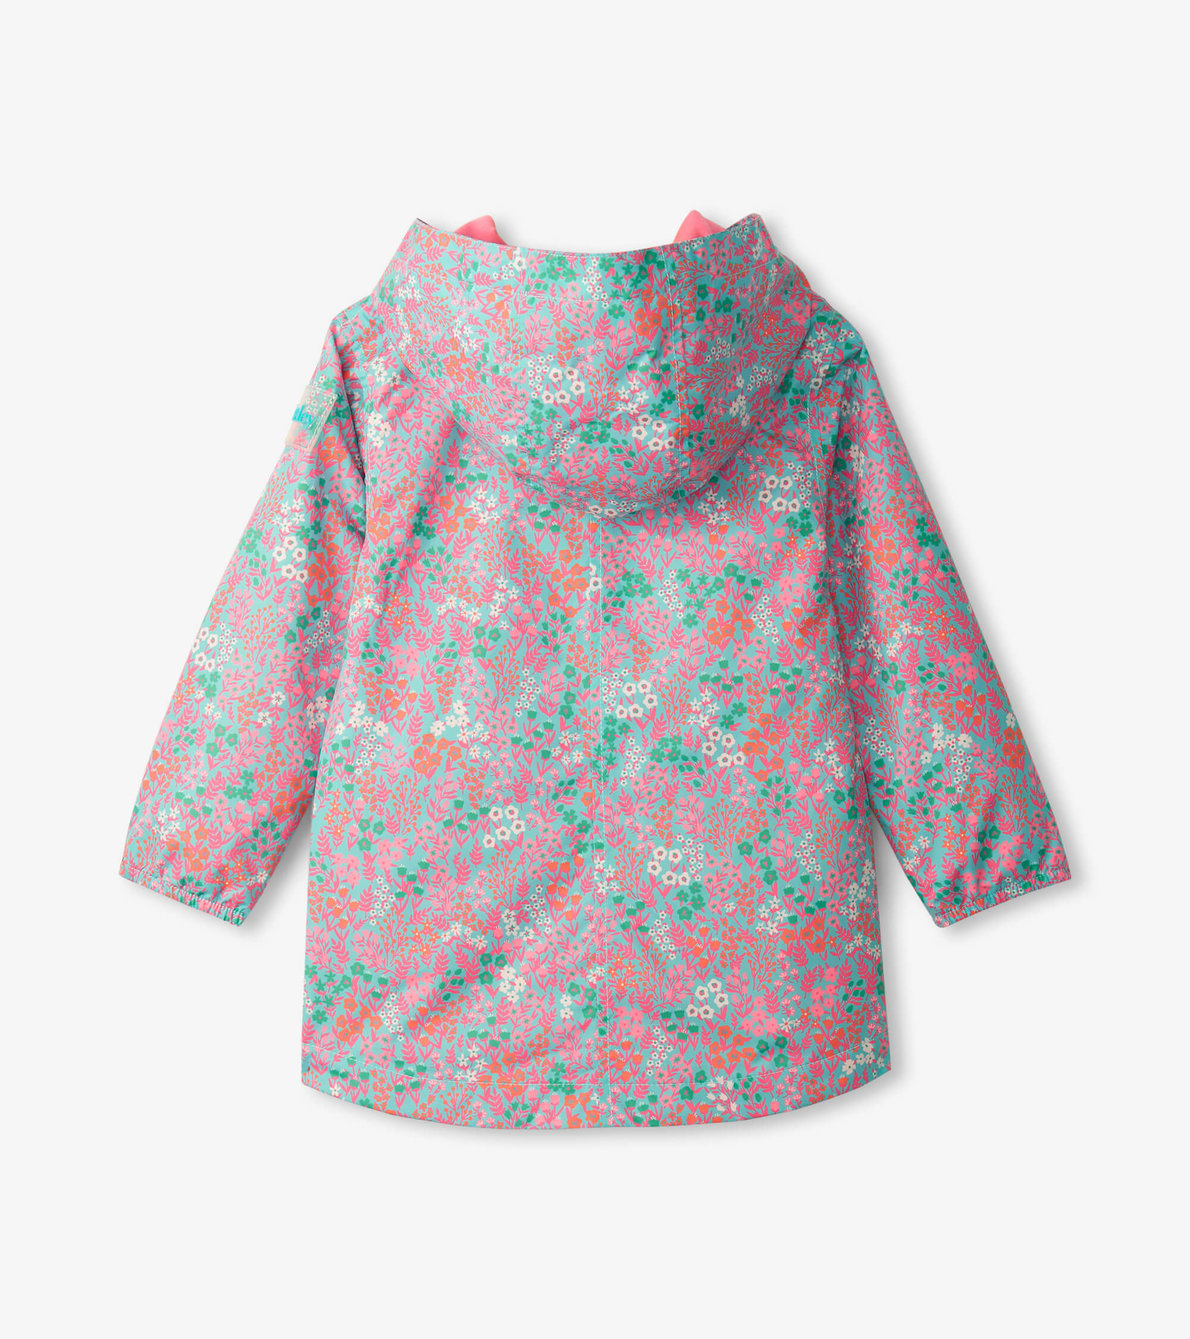 View larger image of Girls Ditsy Floral Field Jacket